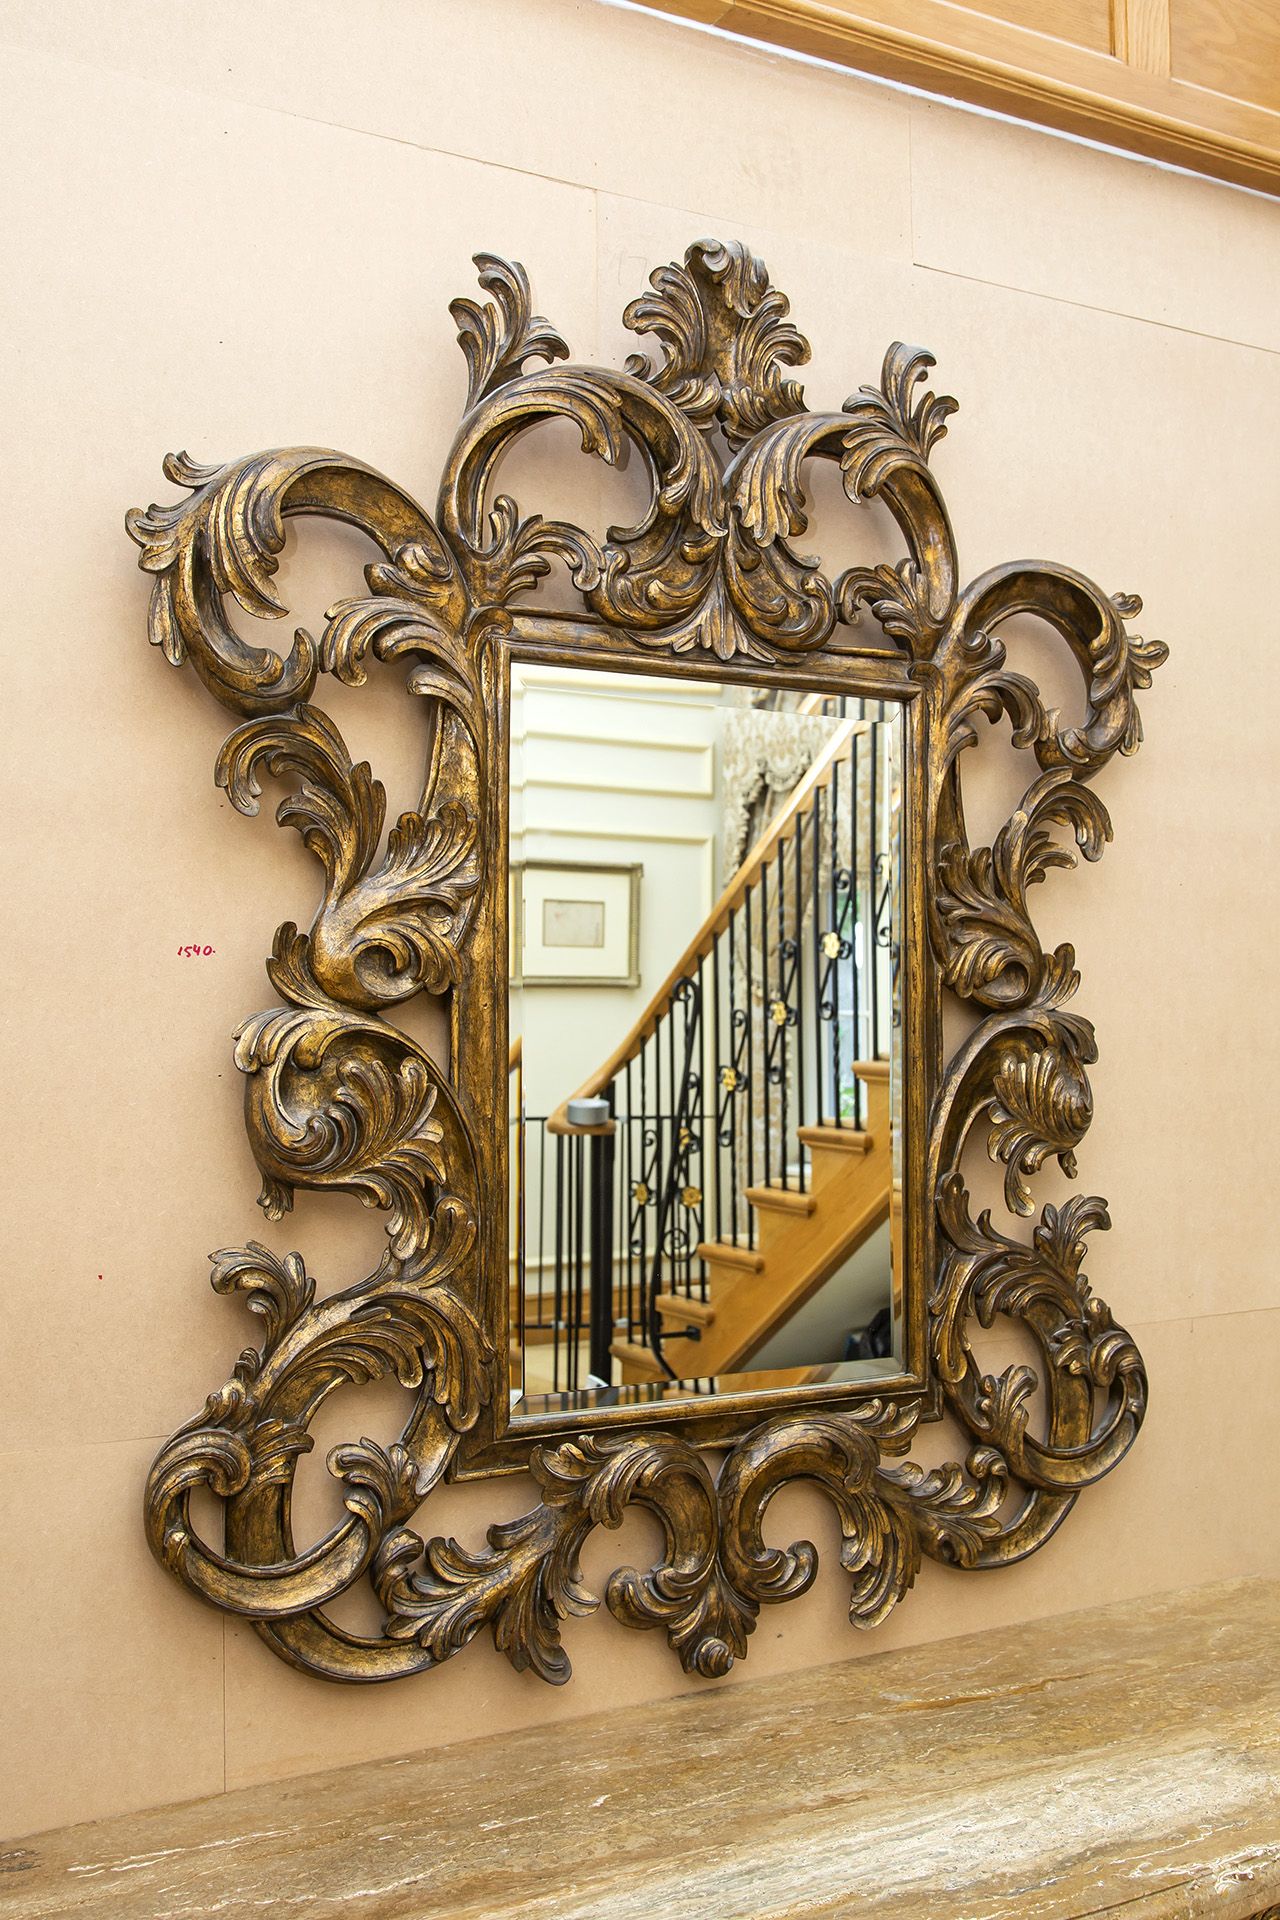 Christpher Guy Cederic Mirror Handcarved solid hardwood and hand-applied finishes bombato border - Image 3 of 6